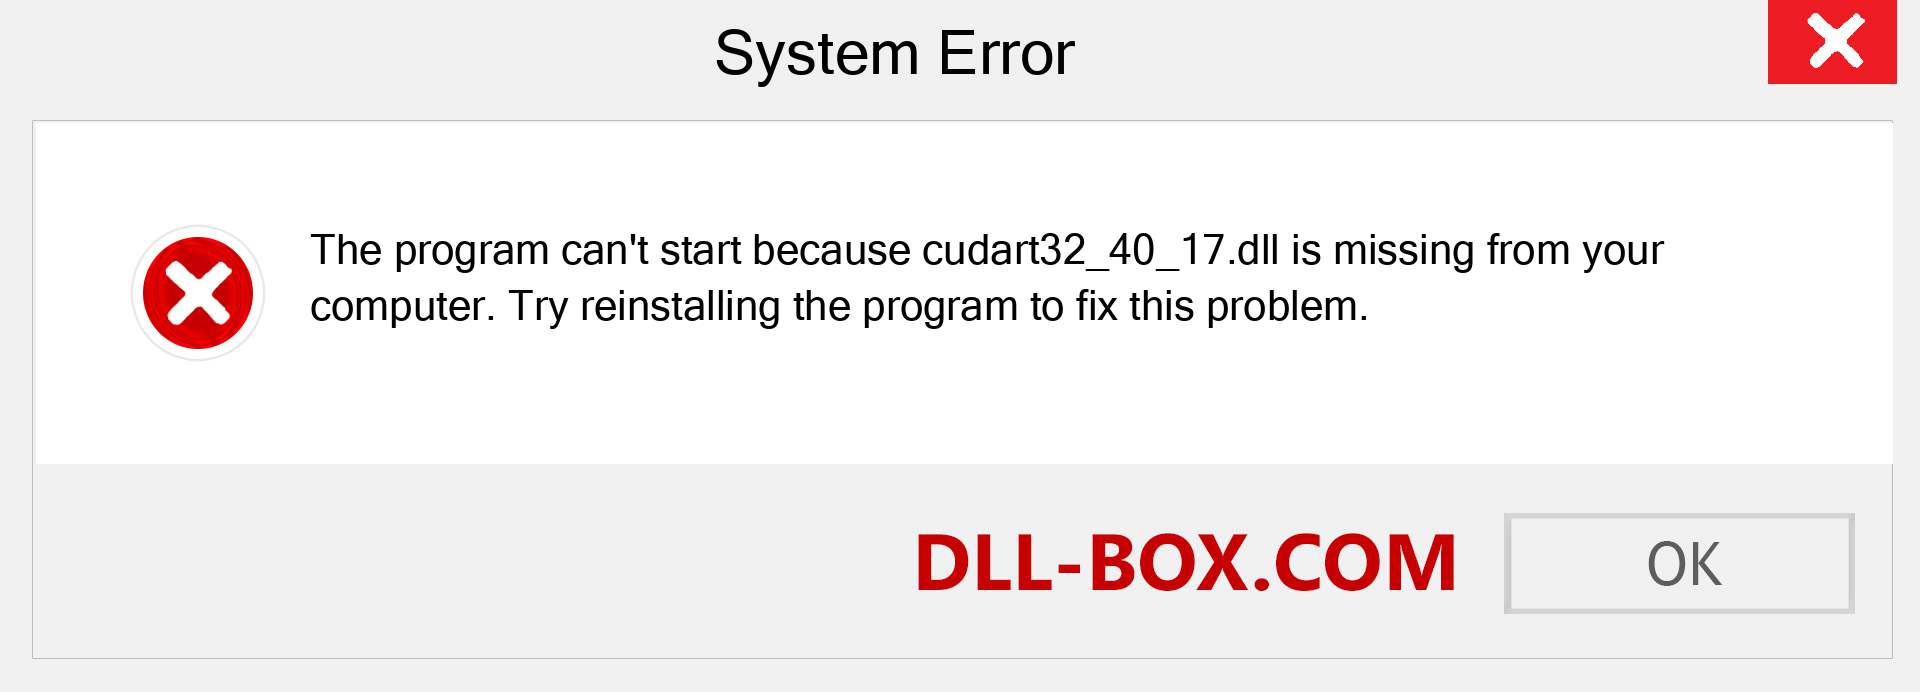  cudart32_40_17.dll file is missing?. Download for Windows 7, 8, 10 - Fix  cudart32_40_17 dll Missing Error on Windows, photos, images